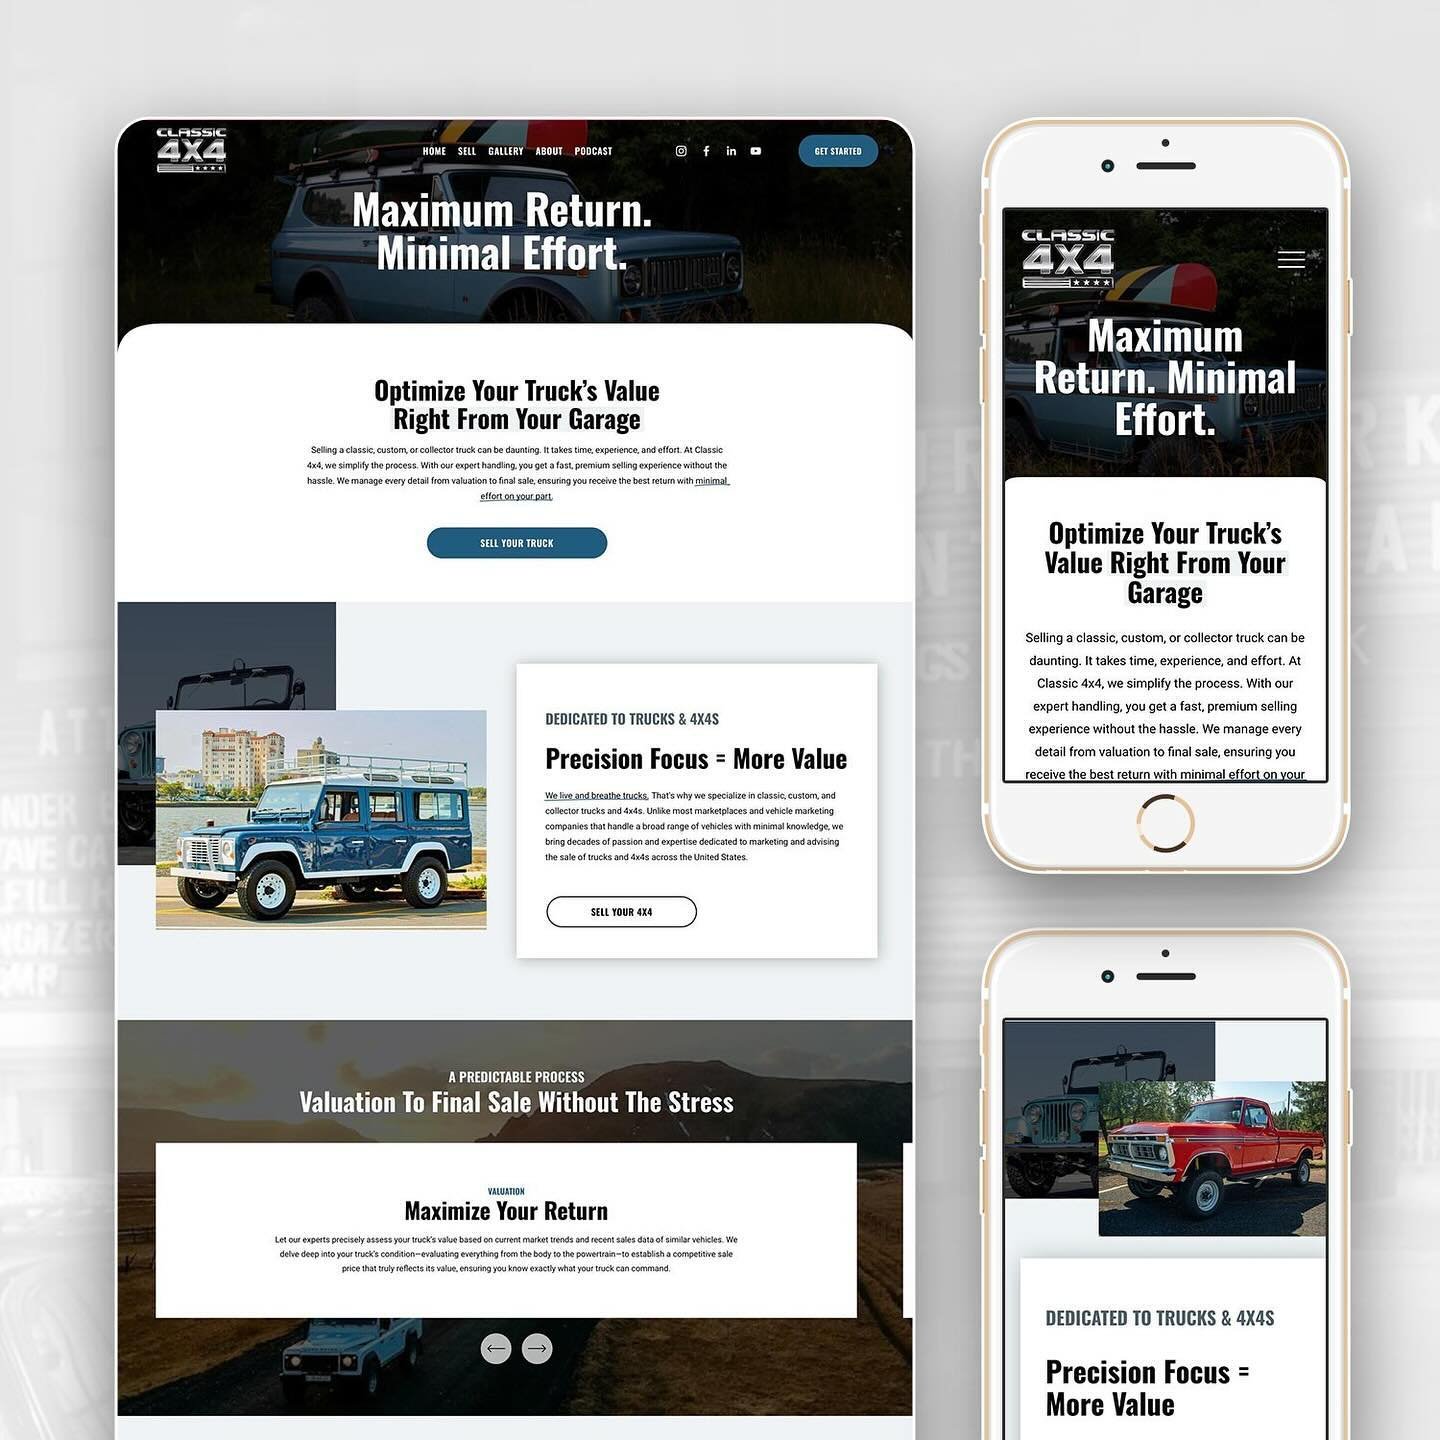 It&rsquo;s been a busy month and we&rsquo;re launching another One Week Website over here for Classic 4x4, a collector 4x4 and truck online seller! The owner Chris was referred to me by a past client to upgrade his website and make it more engaging. 